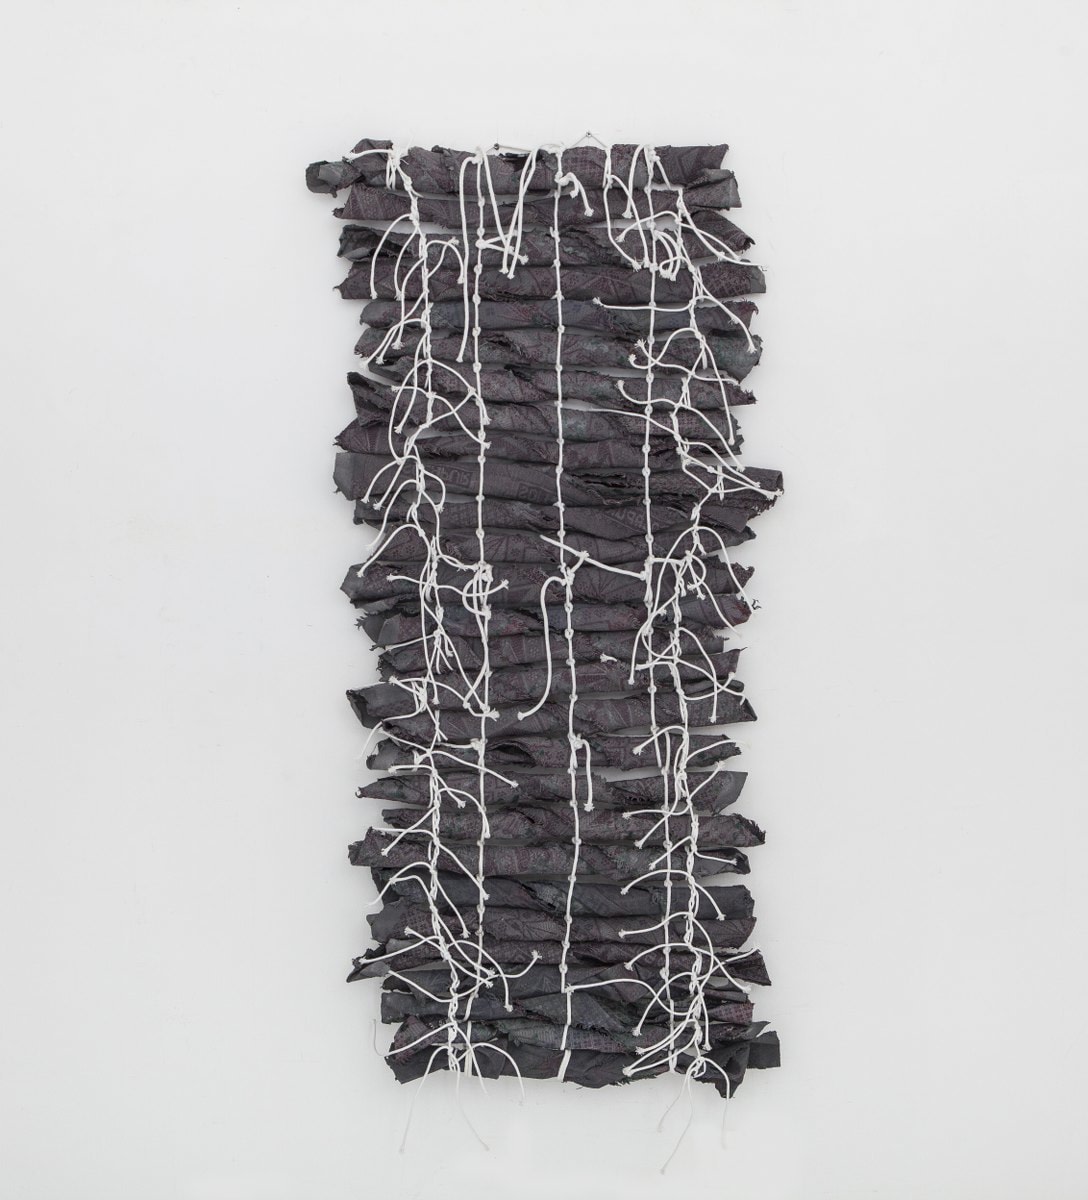 Hassan Sharif, Rug, Cotton Rope and Glue, 2013